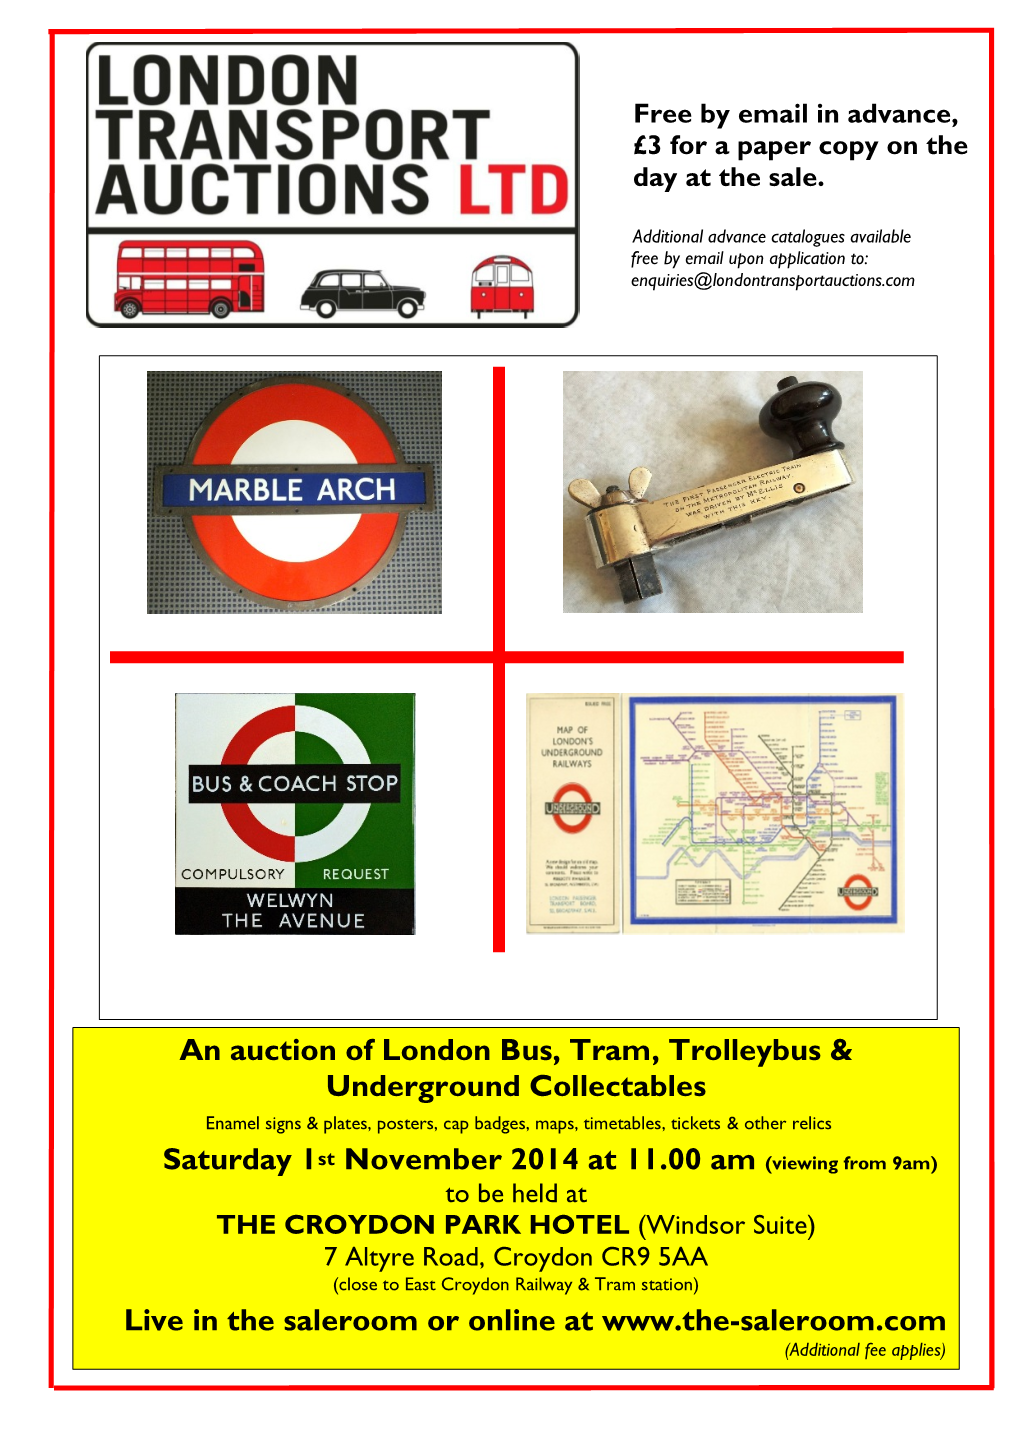 An Auction of London Bus, Tram, Trolleybus & Underground Collectables Saturday 1St November 2014 at 11.00 Am